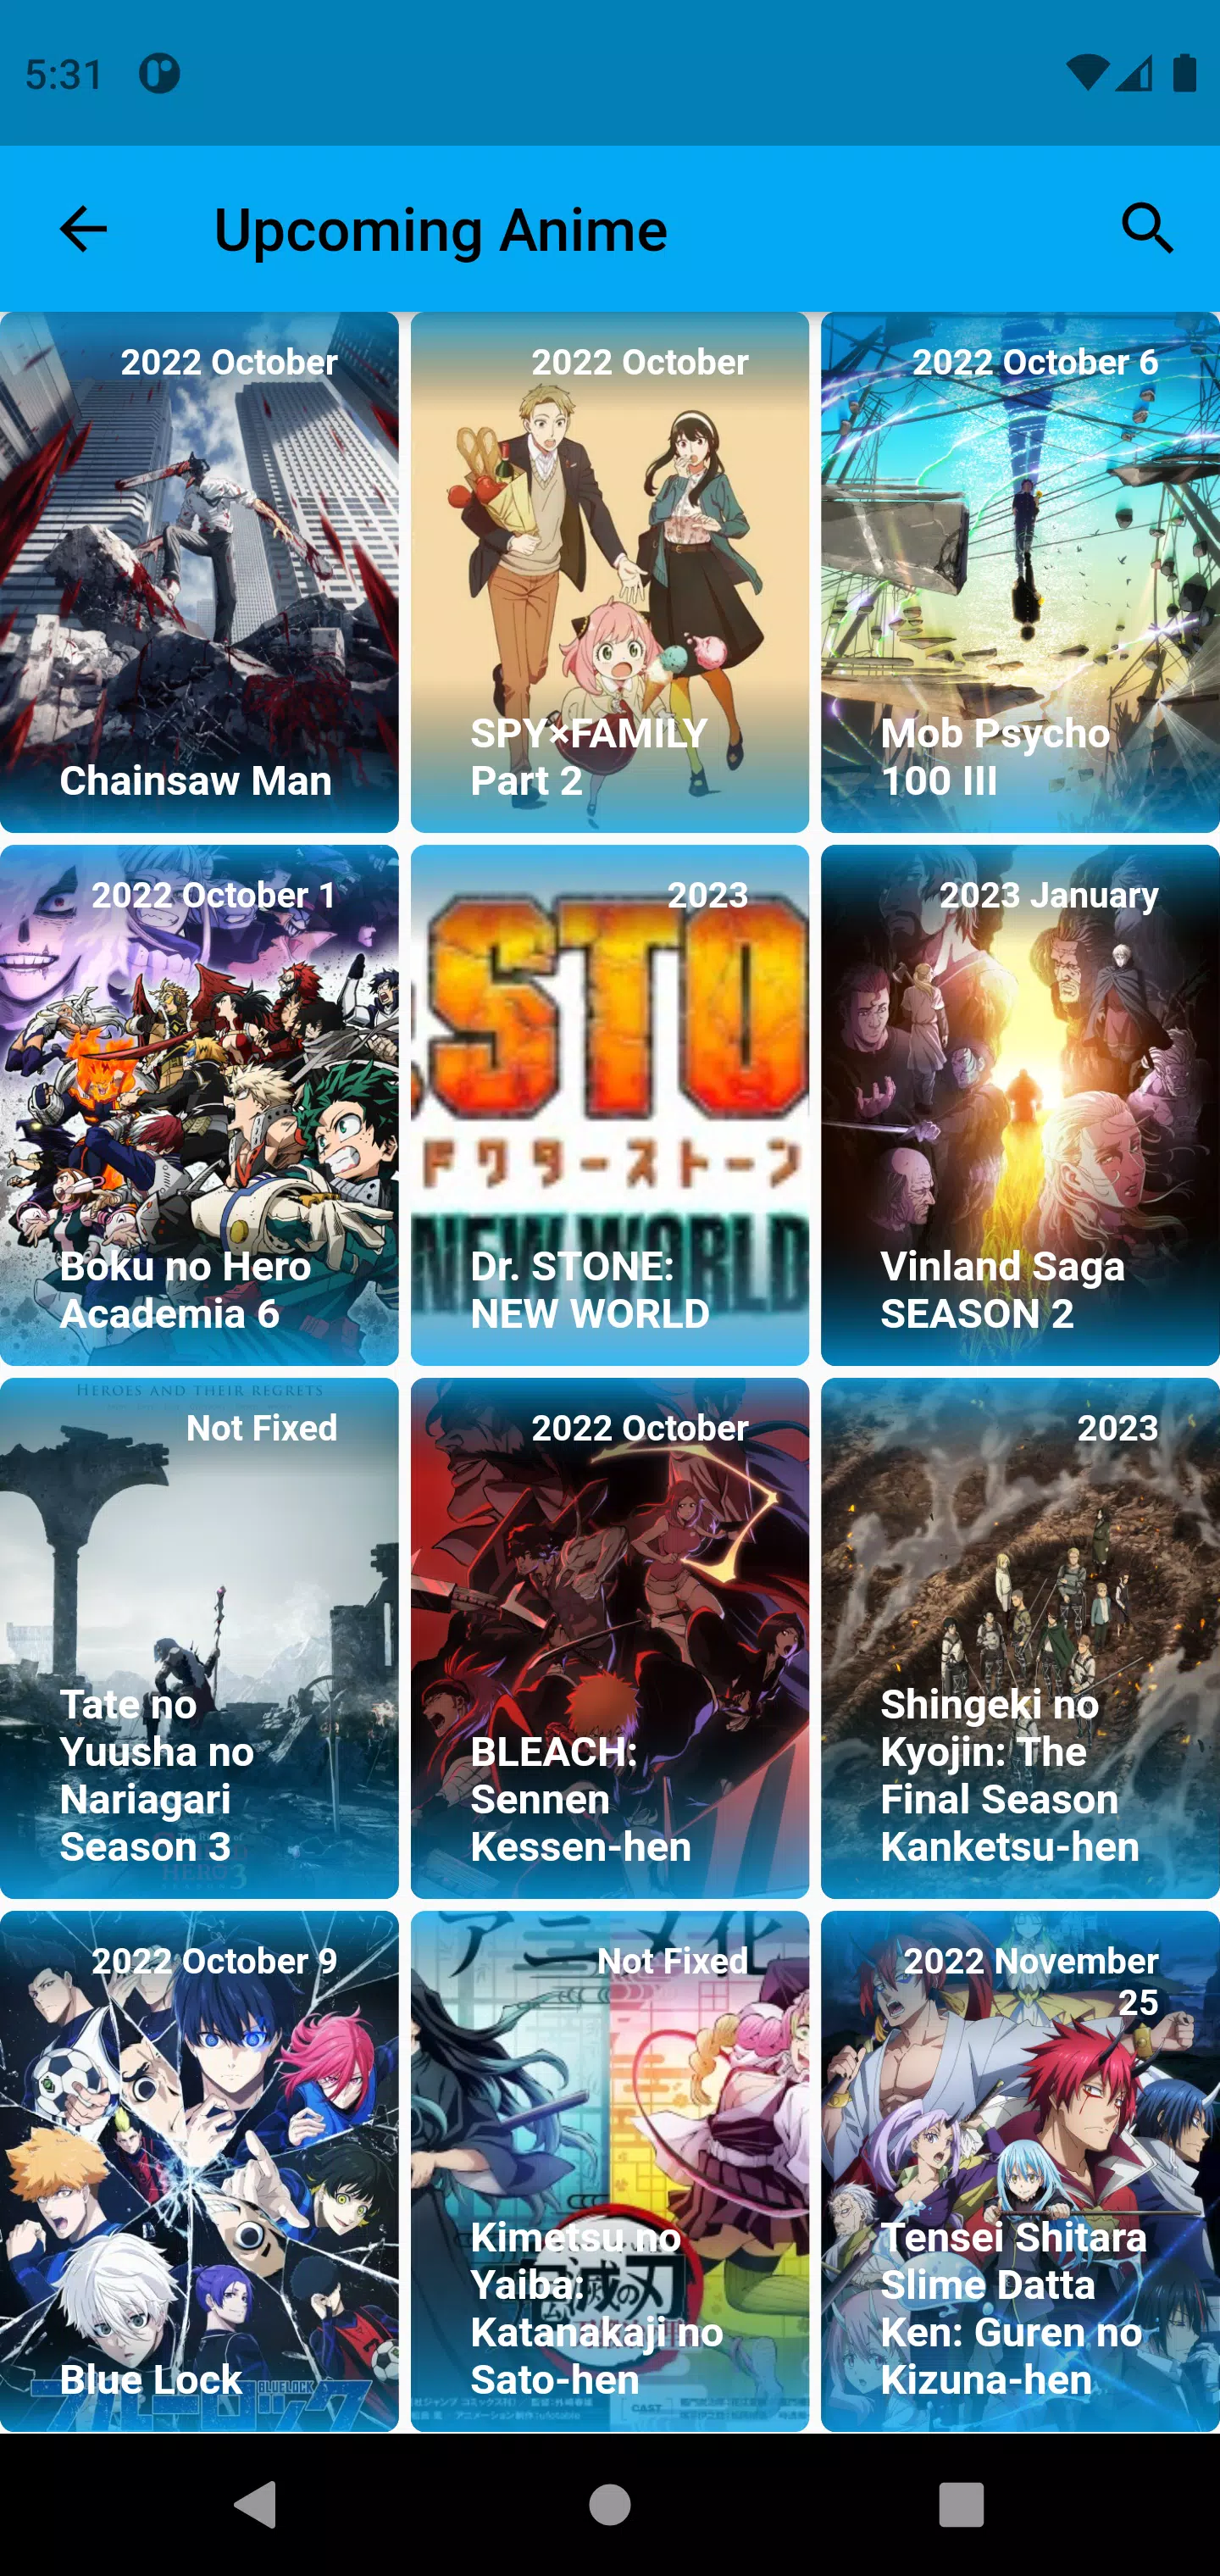 NextAnime Apk Download for Android- Latest version 2.7.7- com.next.anime